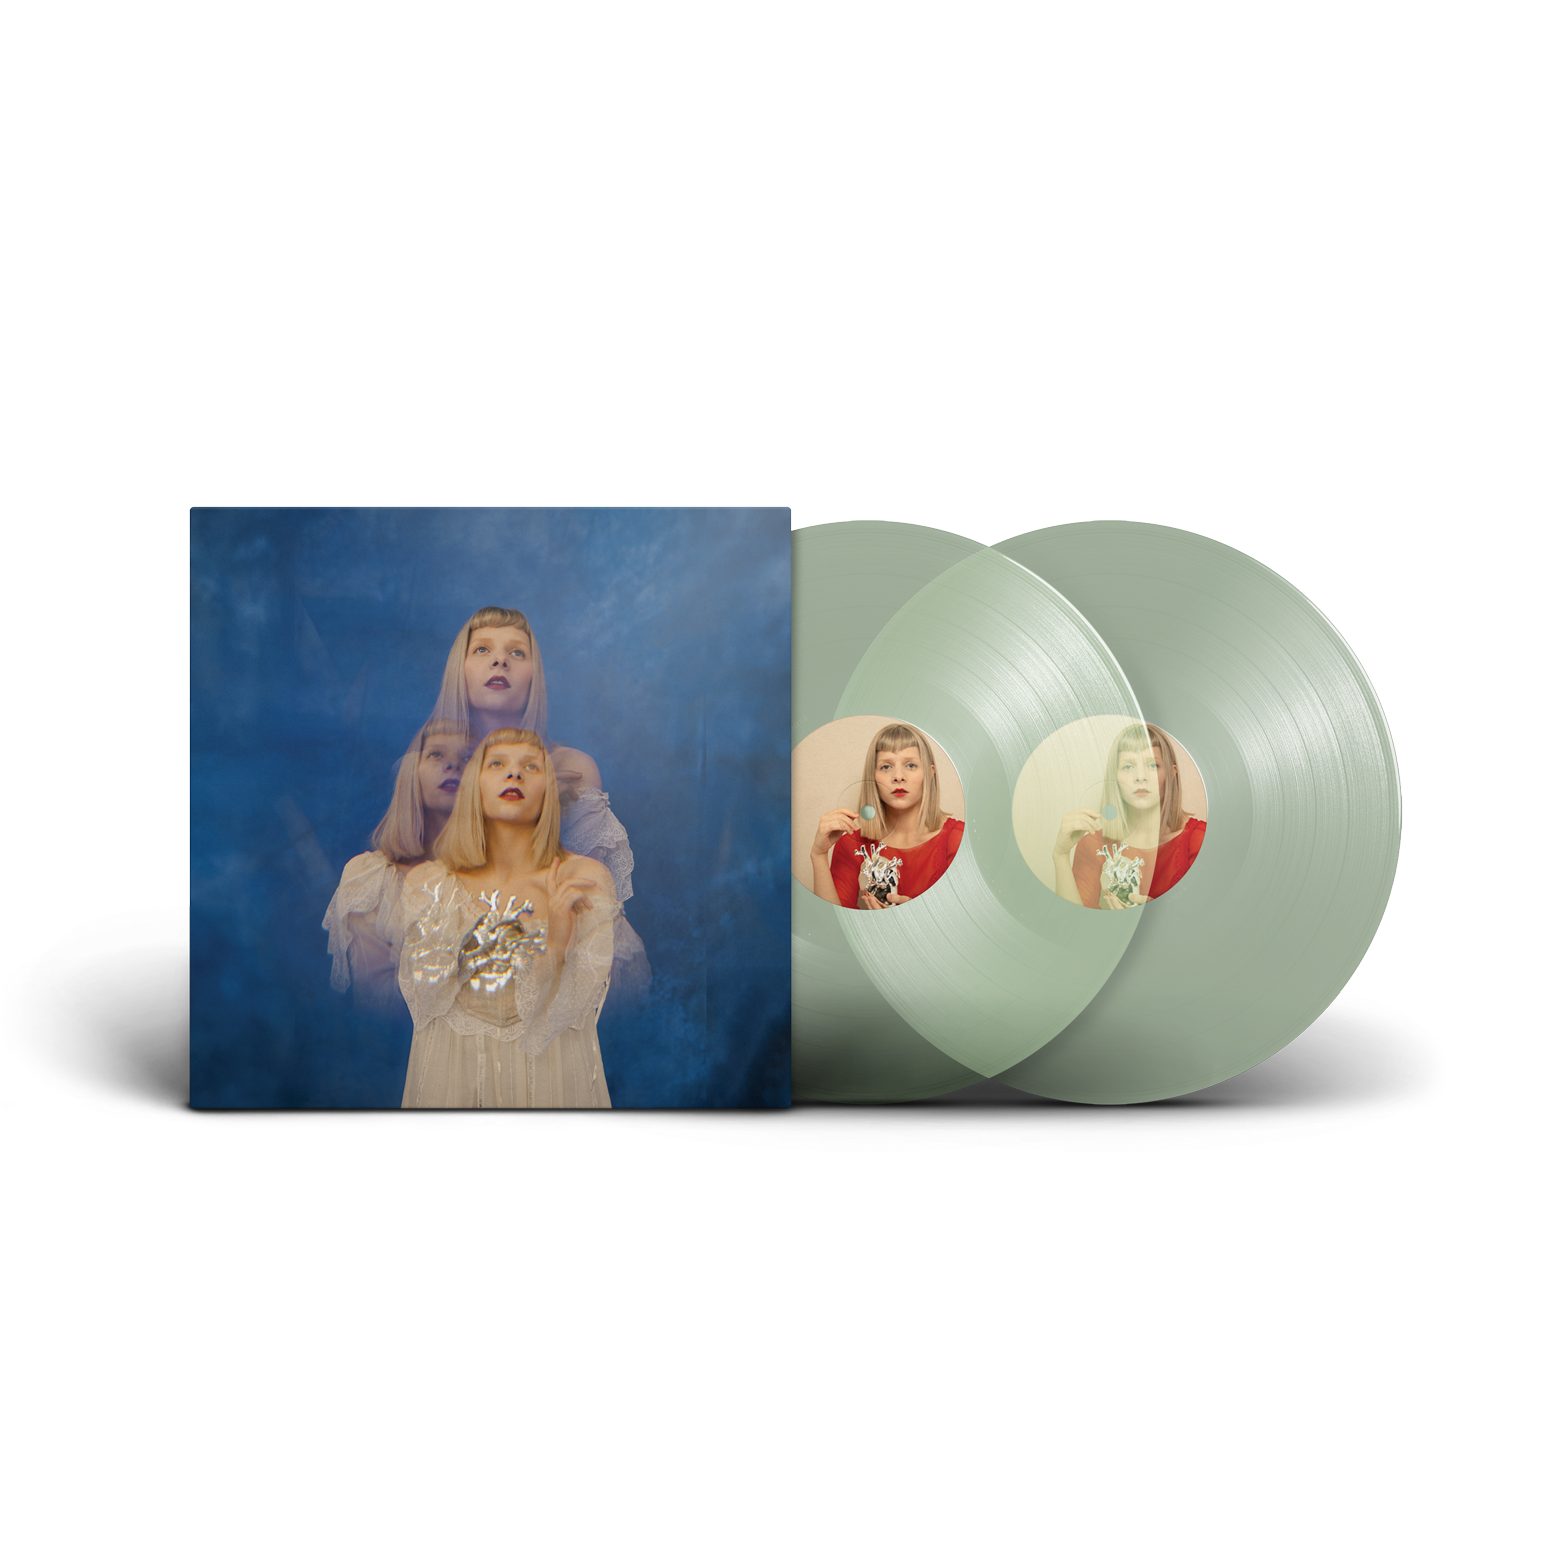 Aurora - What Happened To The Heart? (Weirdo's Version) Exclusive 2LP